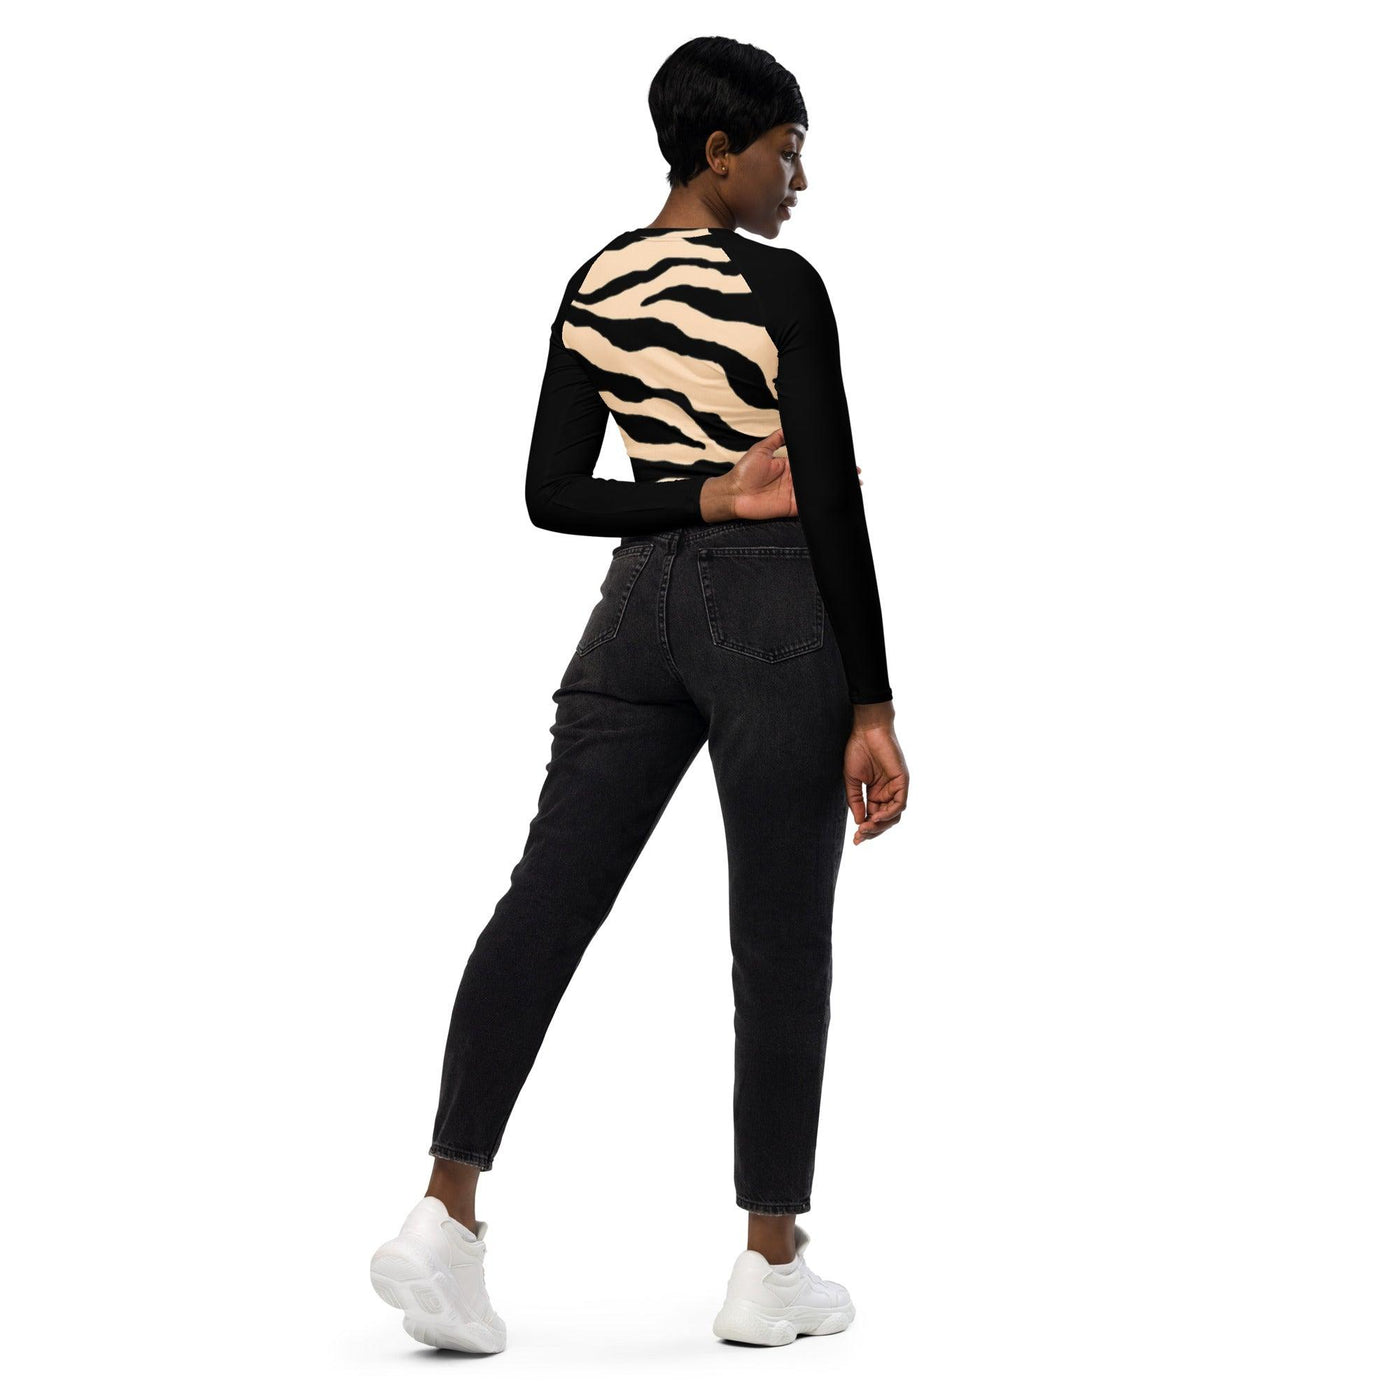 Recycled long-sleeve crop top - fashion$ense-6263